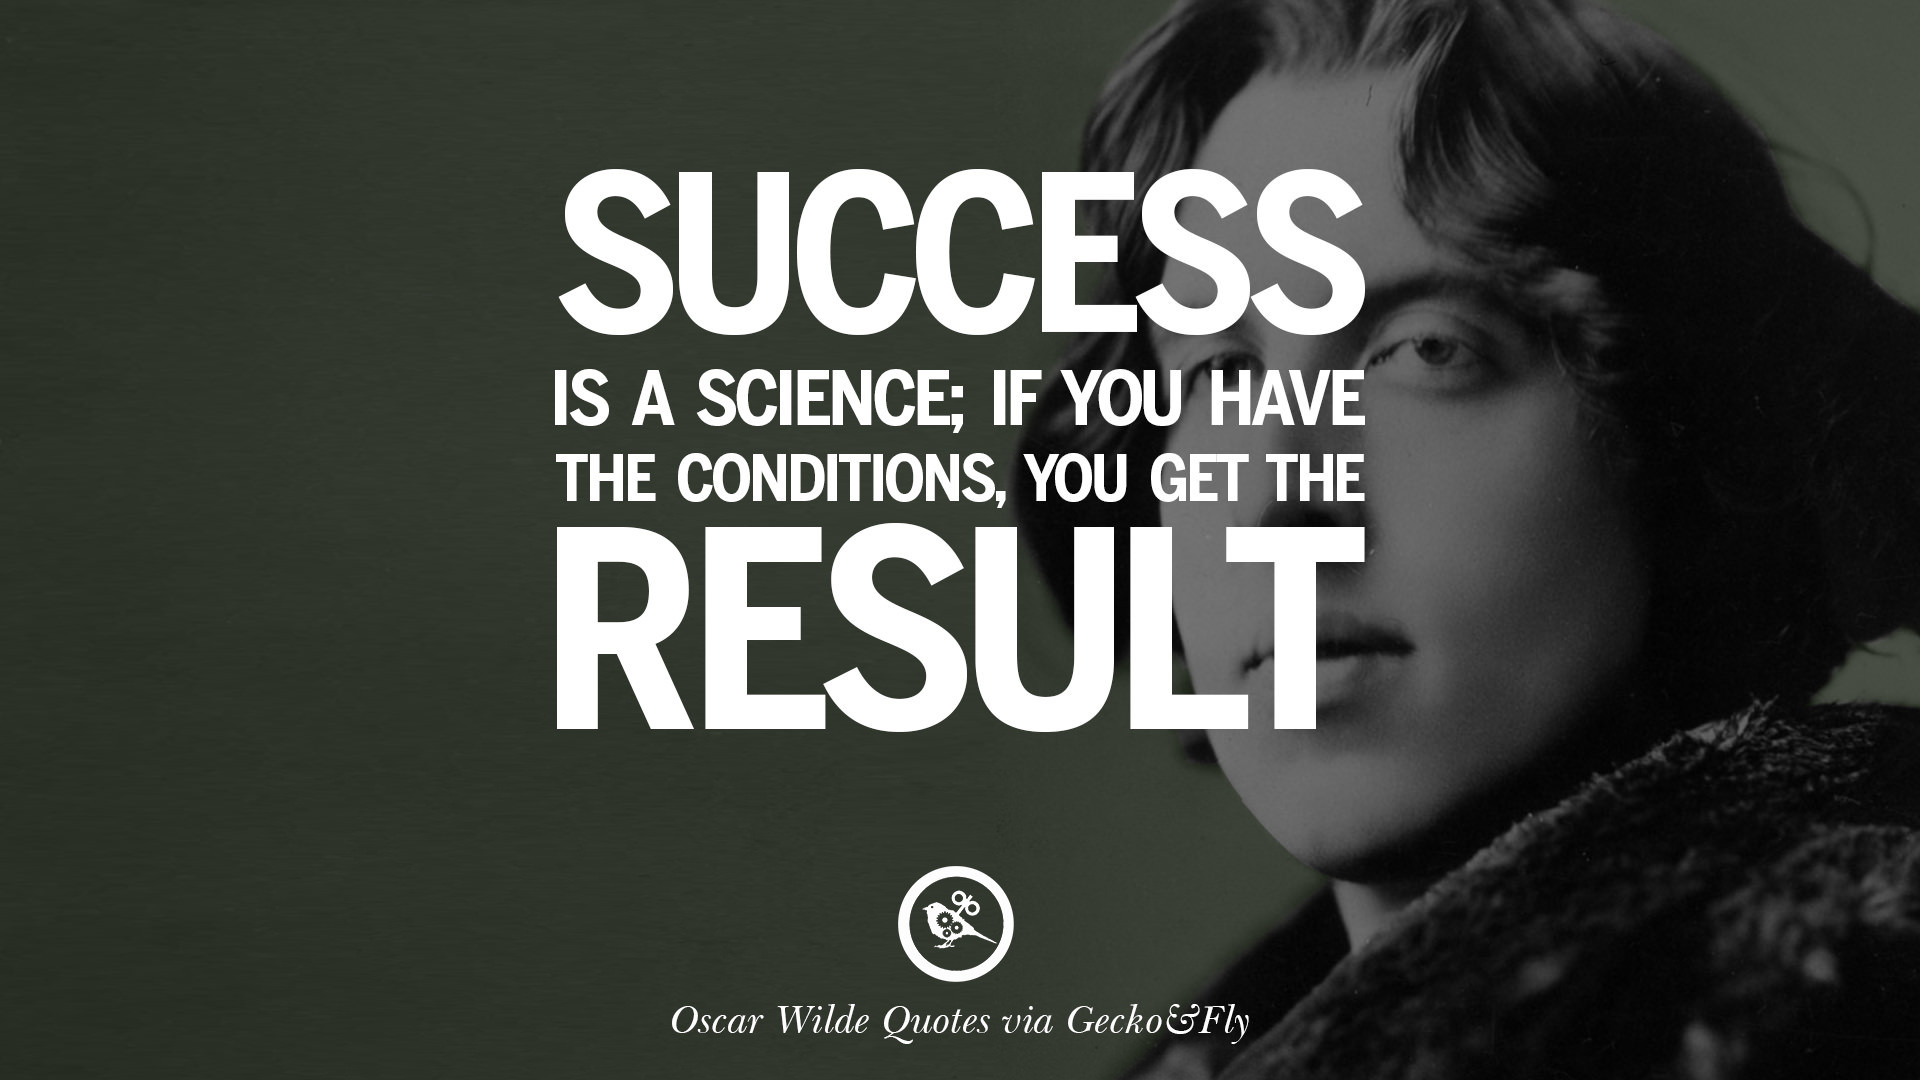 Oscar Wilde Quotes About Life
 20 Oscar Wilde s Wittiest Quotes Life And Wisdom